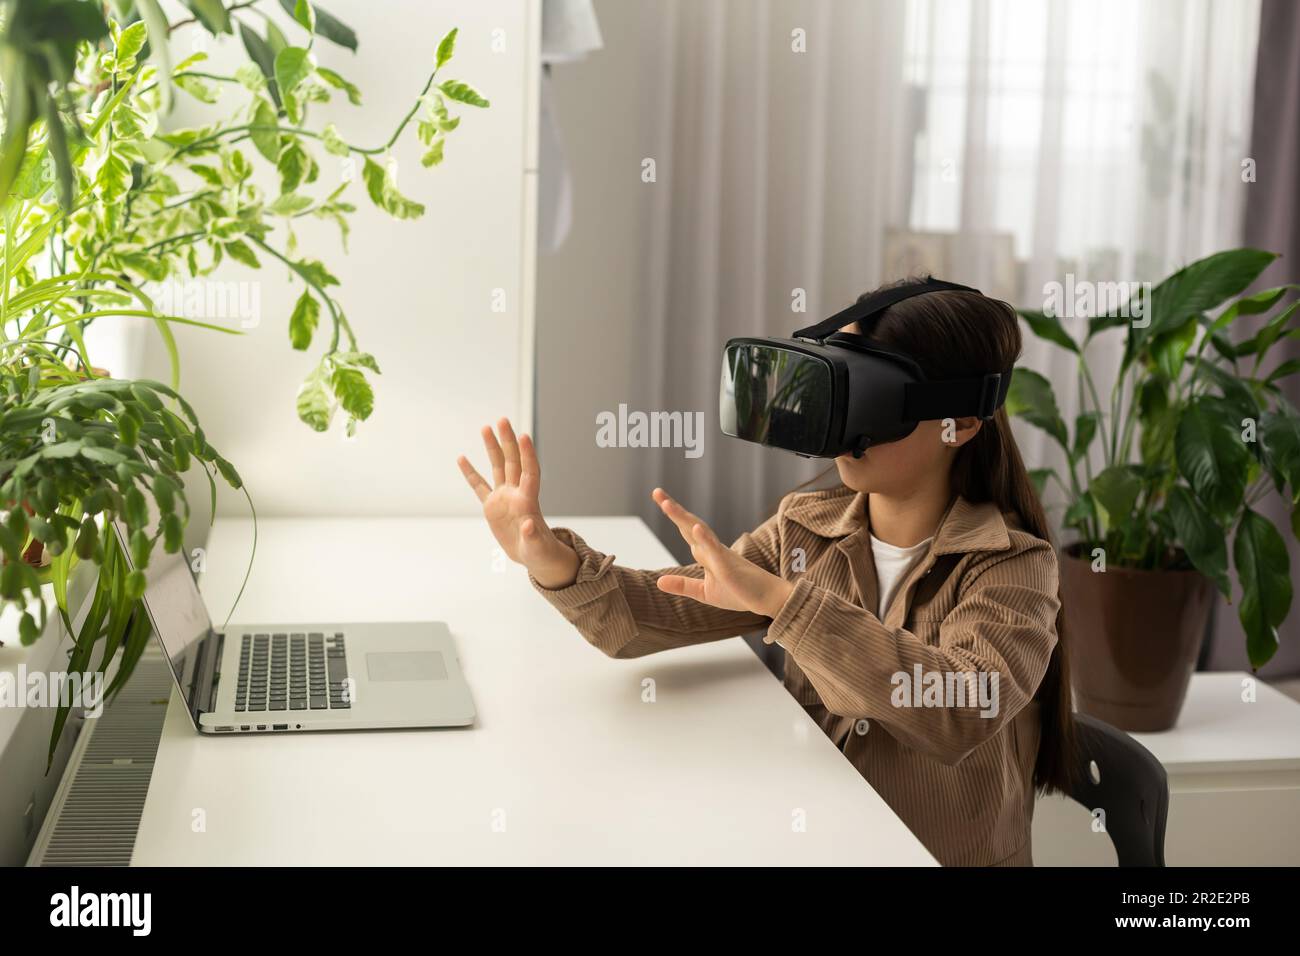 Virtual classes. Driving lessons. Science Class. VR technology. schoolgirl using virtual reality helmet. Virtual reality headset. Teenager student Stock Photo